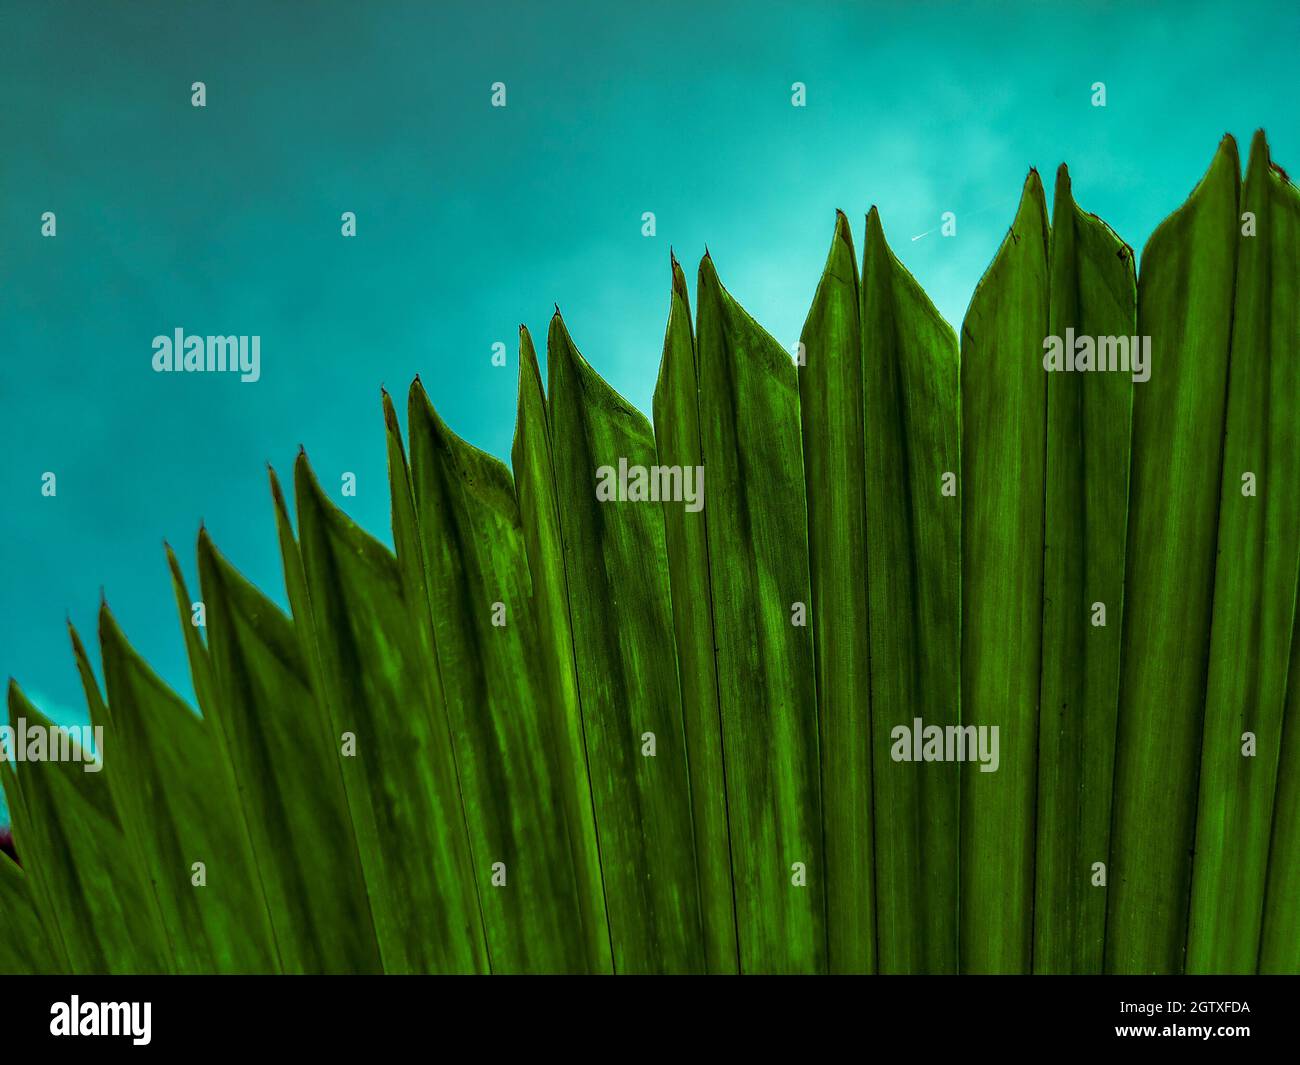 Palm Leaves With Wavy And Pointed Leaf Edges Stock Photo